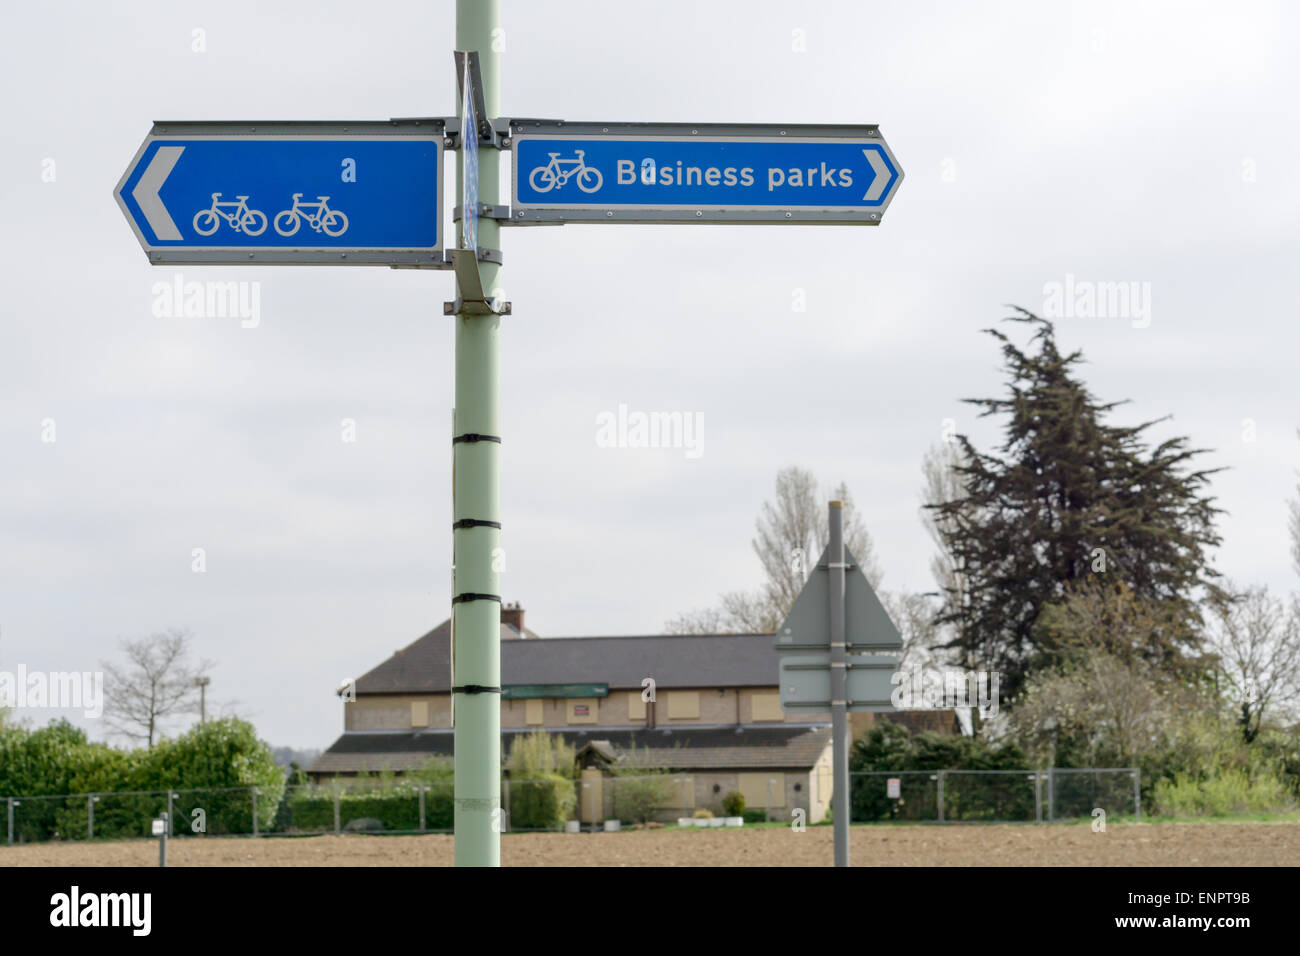 Sign for Business parks and cycle path in rural England Stock Photo